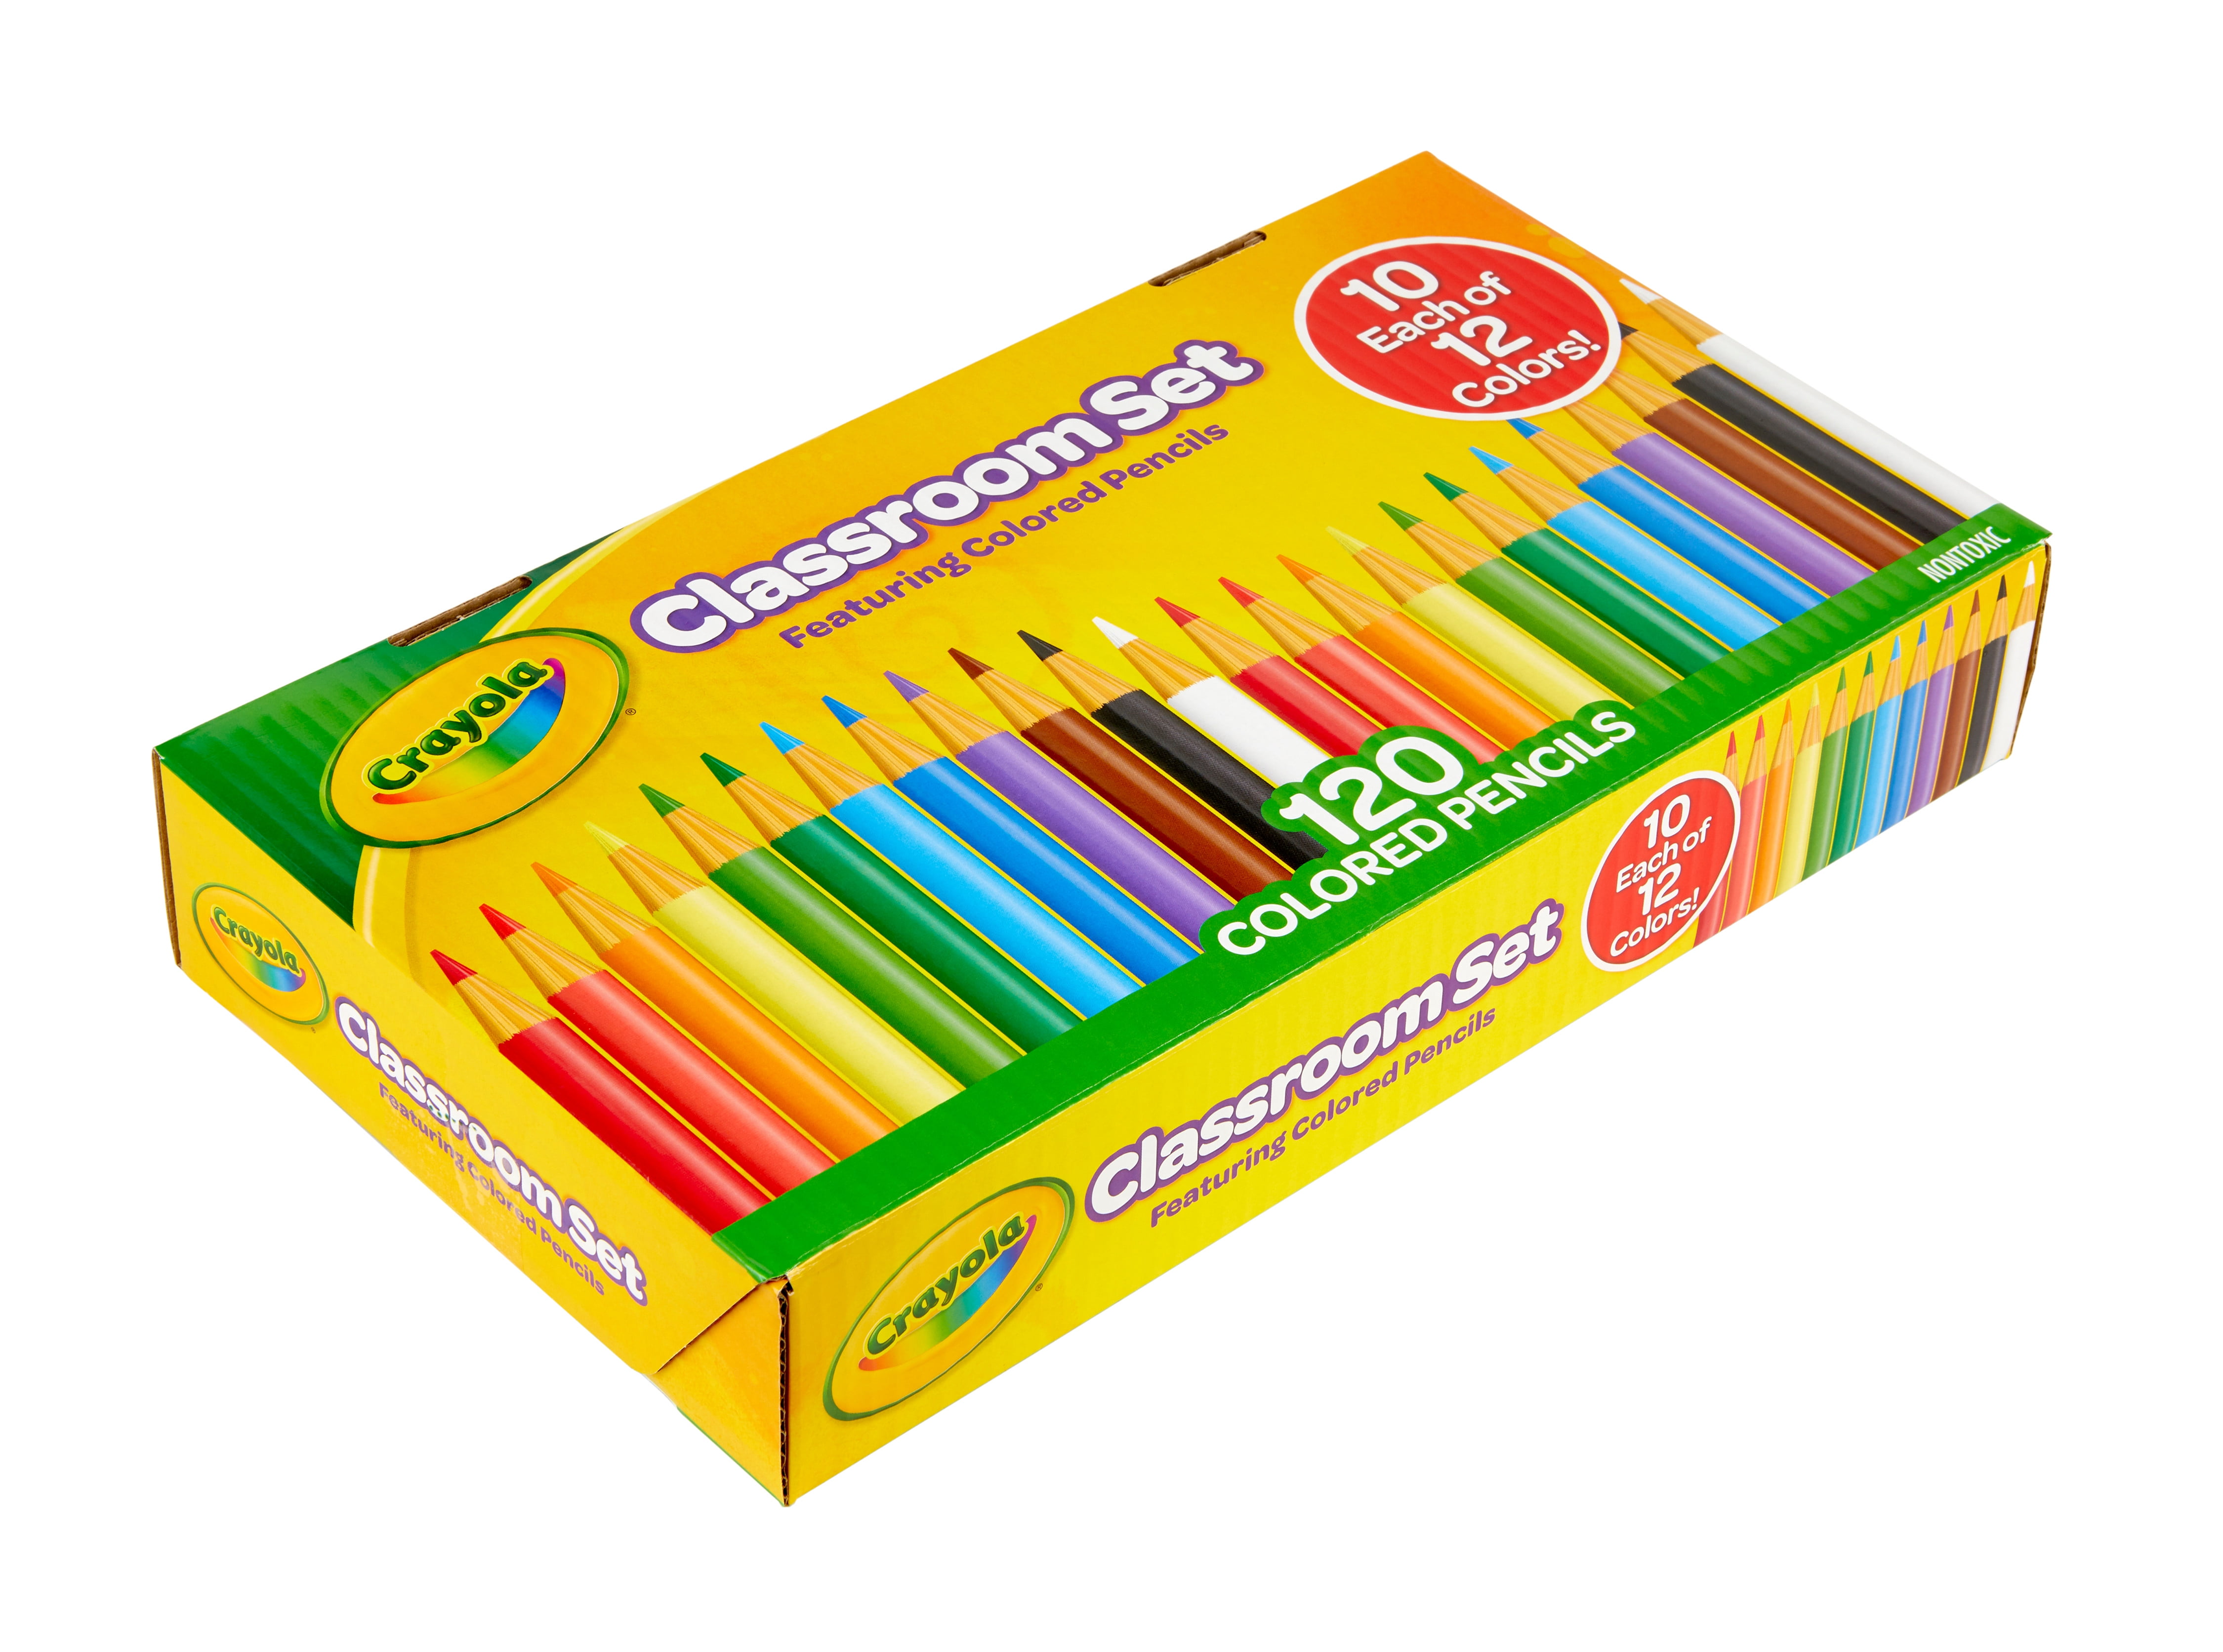 Crayola Colored Pencils Set (120ct), Bulk, Great for Adult Coloring Books,  Gifts for Kids & Adults and Metallic Colored Pencils, Long, 8-Pack